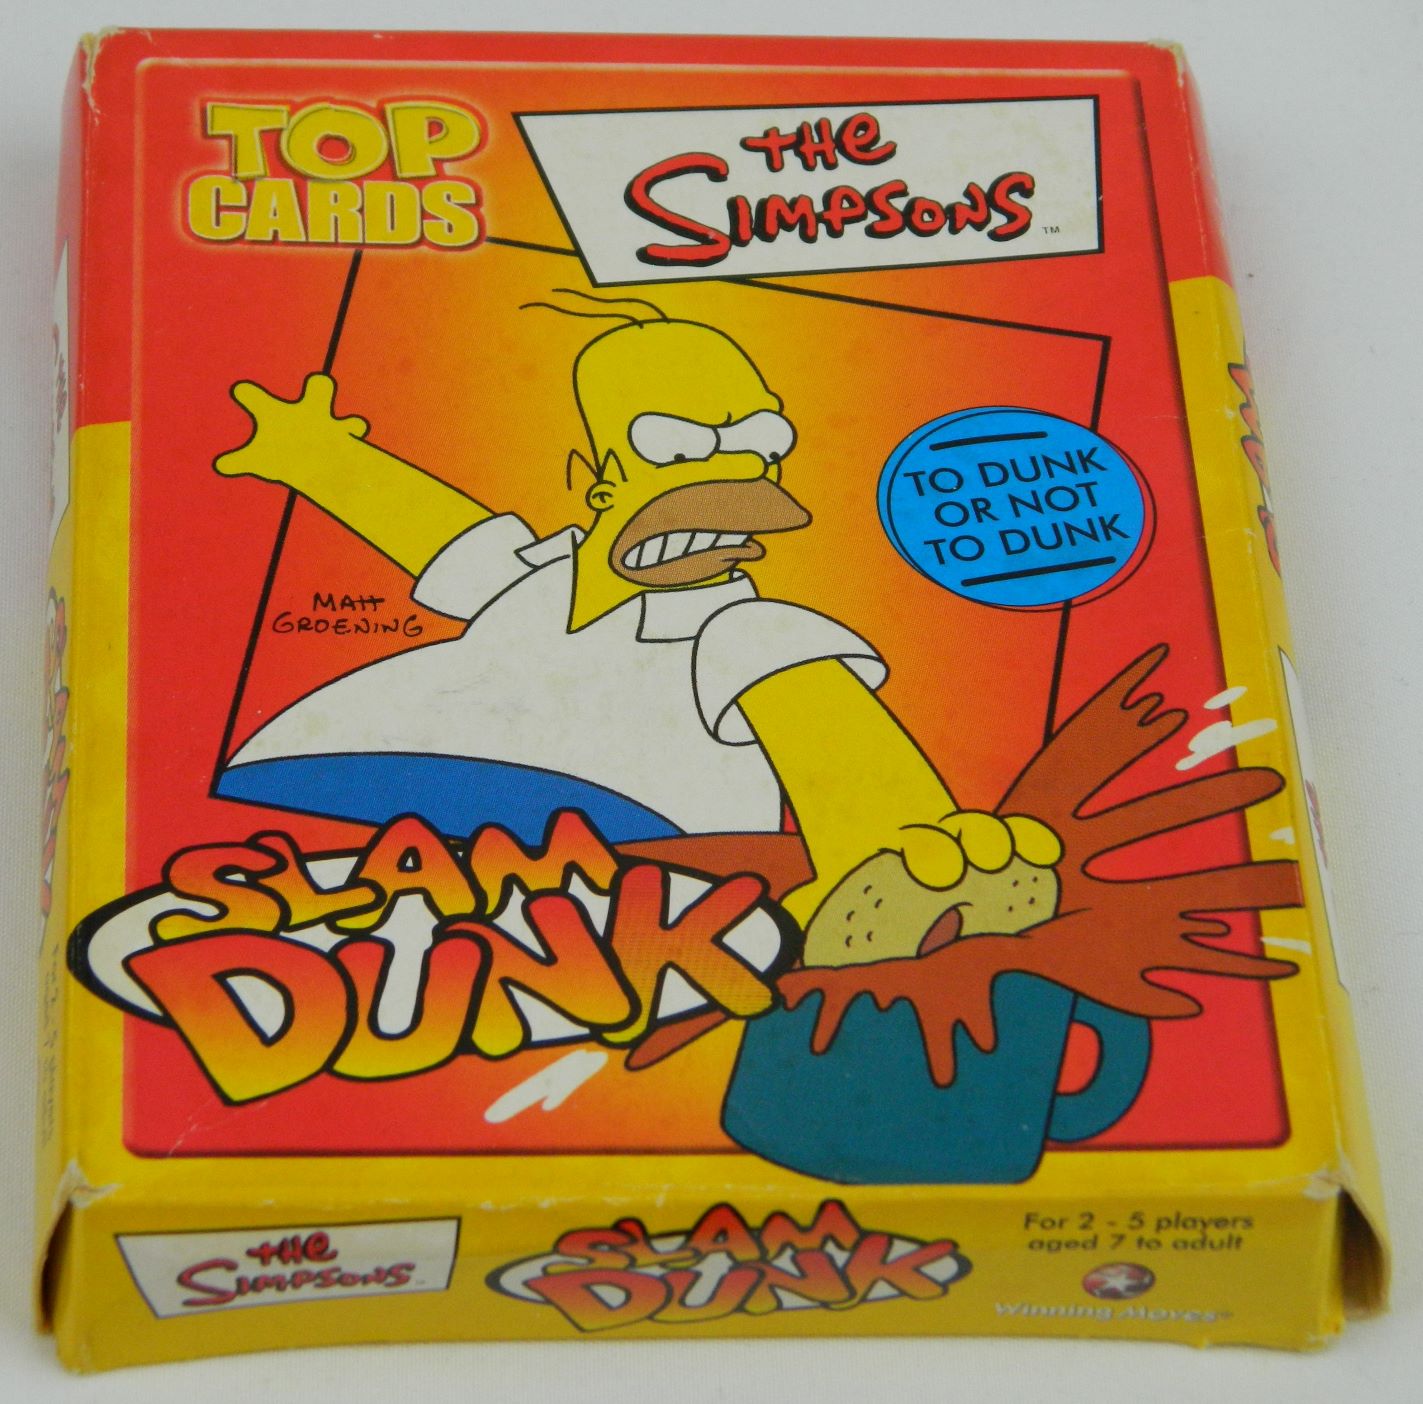 The Simpsons Slam Dunk Aka It’s Mine! Card Game Review and Rules